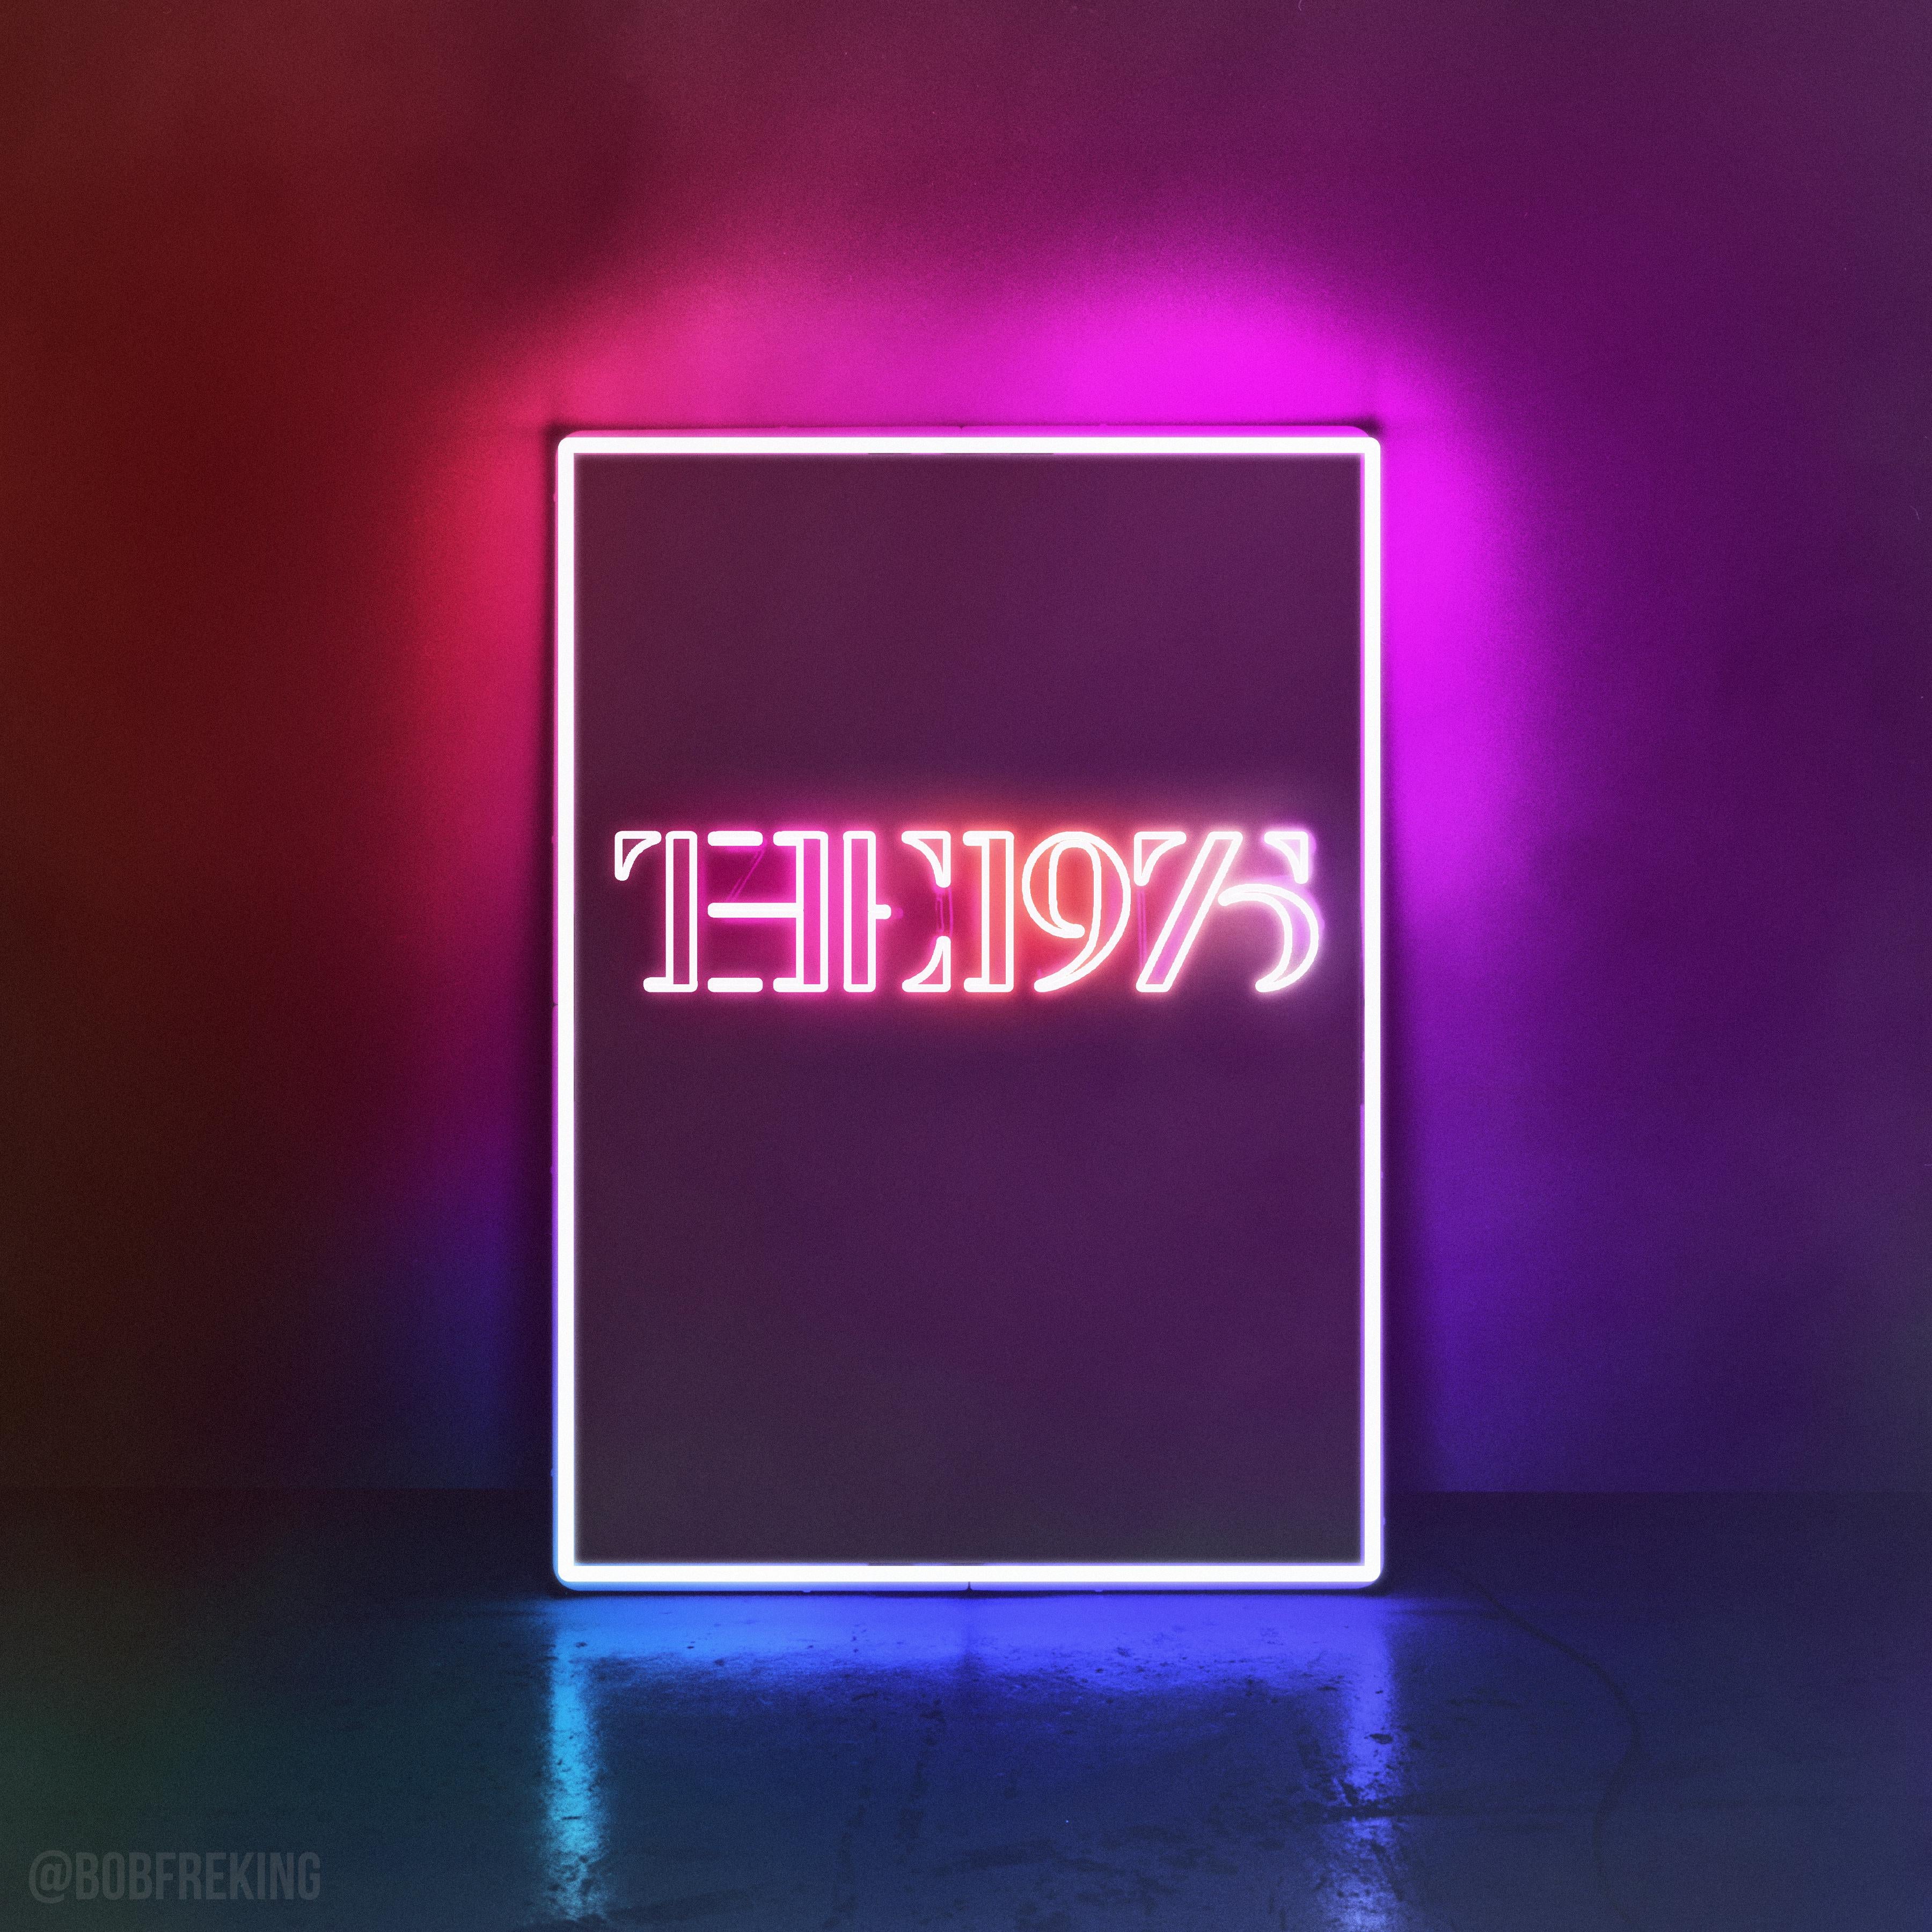 Made My Own The Album Cover What Do You Think R The1975